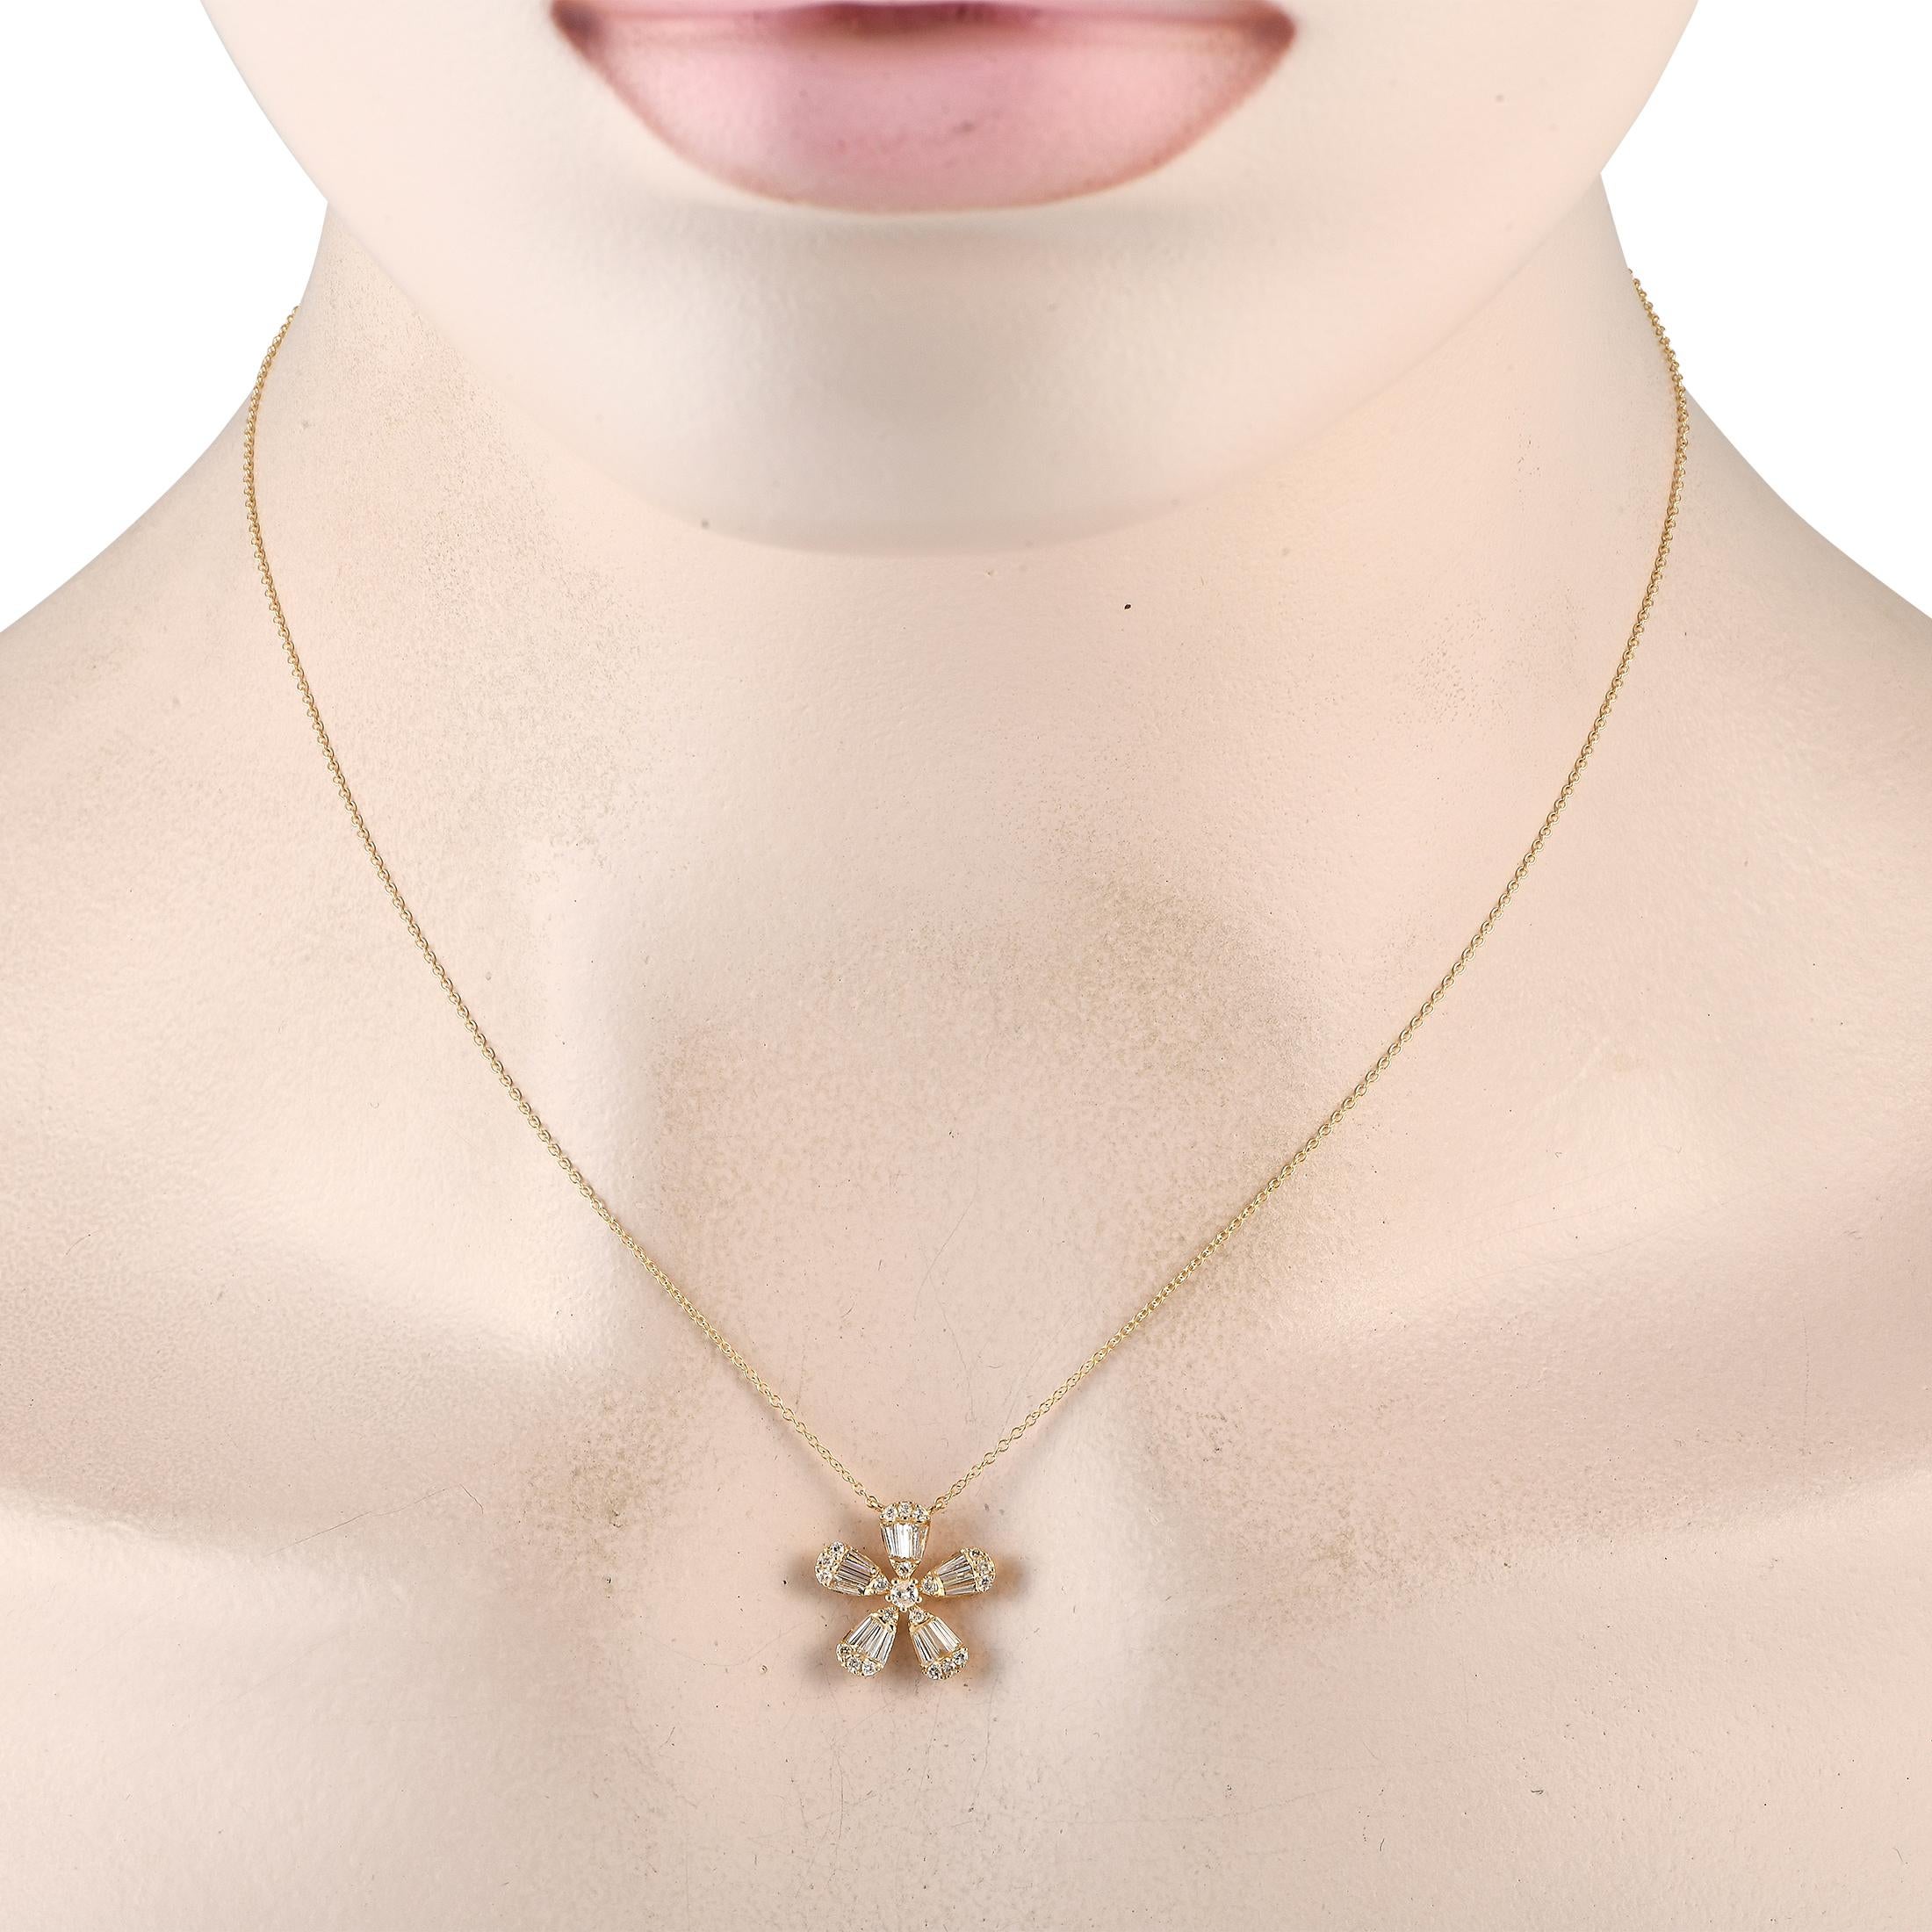 LB Exclusive 14K Yellow Gold 0.65ct Diamond Flower Necklace NK01351 In New Condition For Sale In Southampton, PA